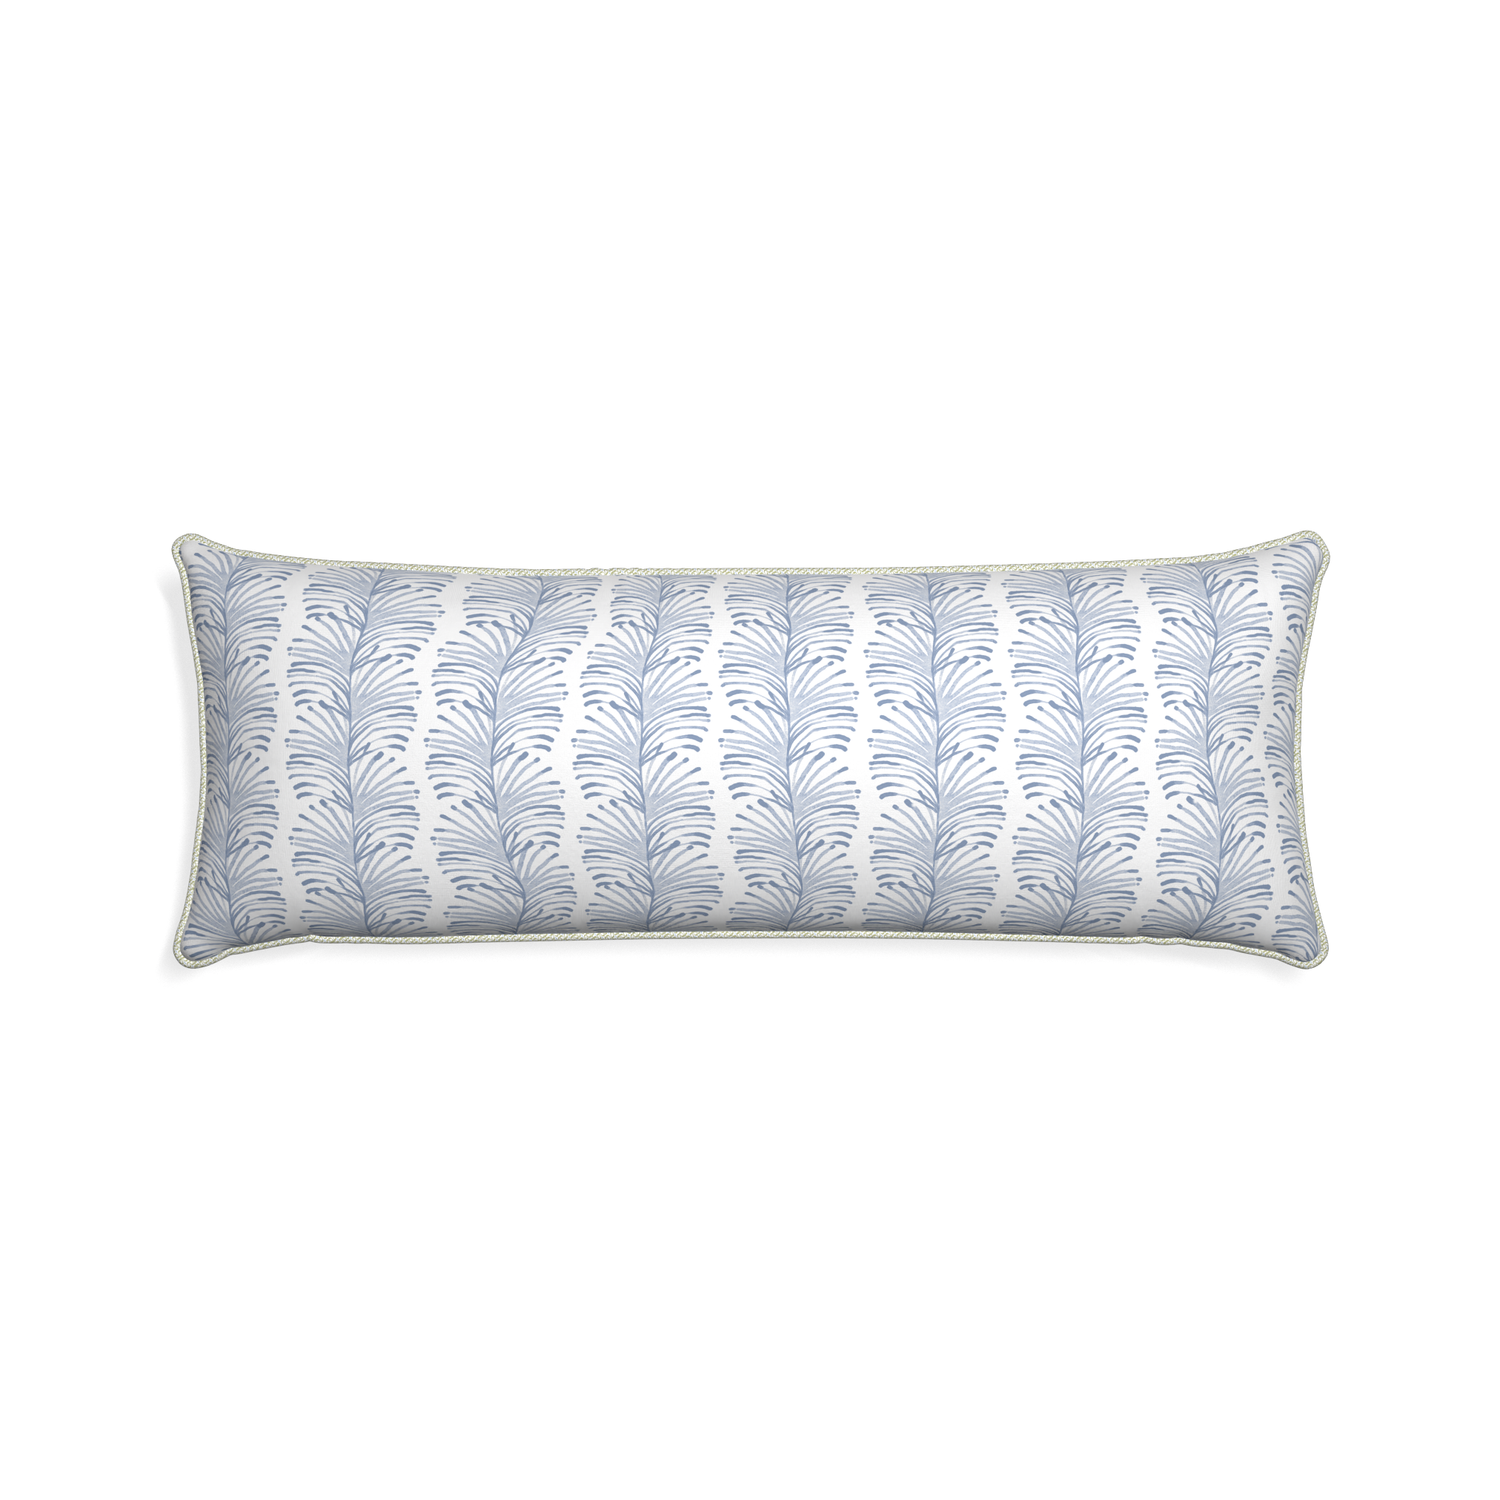 Xl-lumbar emma sky custom sky blue botanical stripepillow with l piping on white background